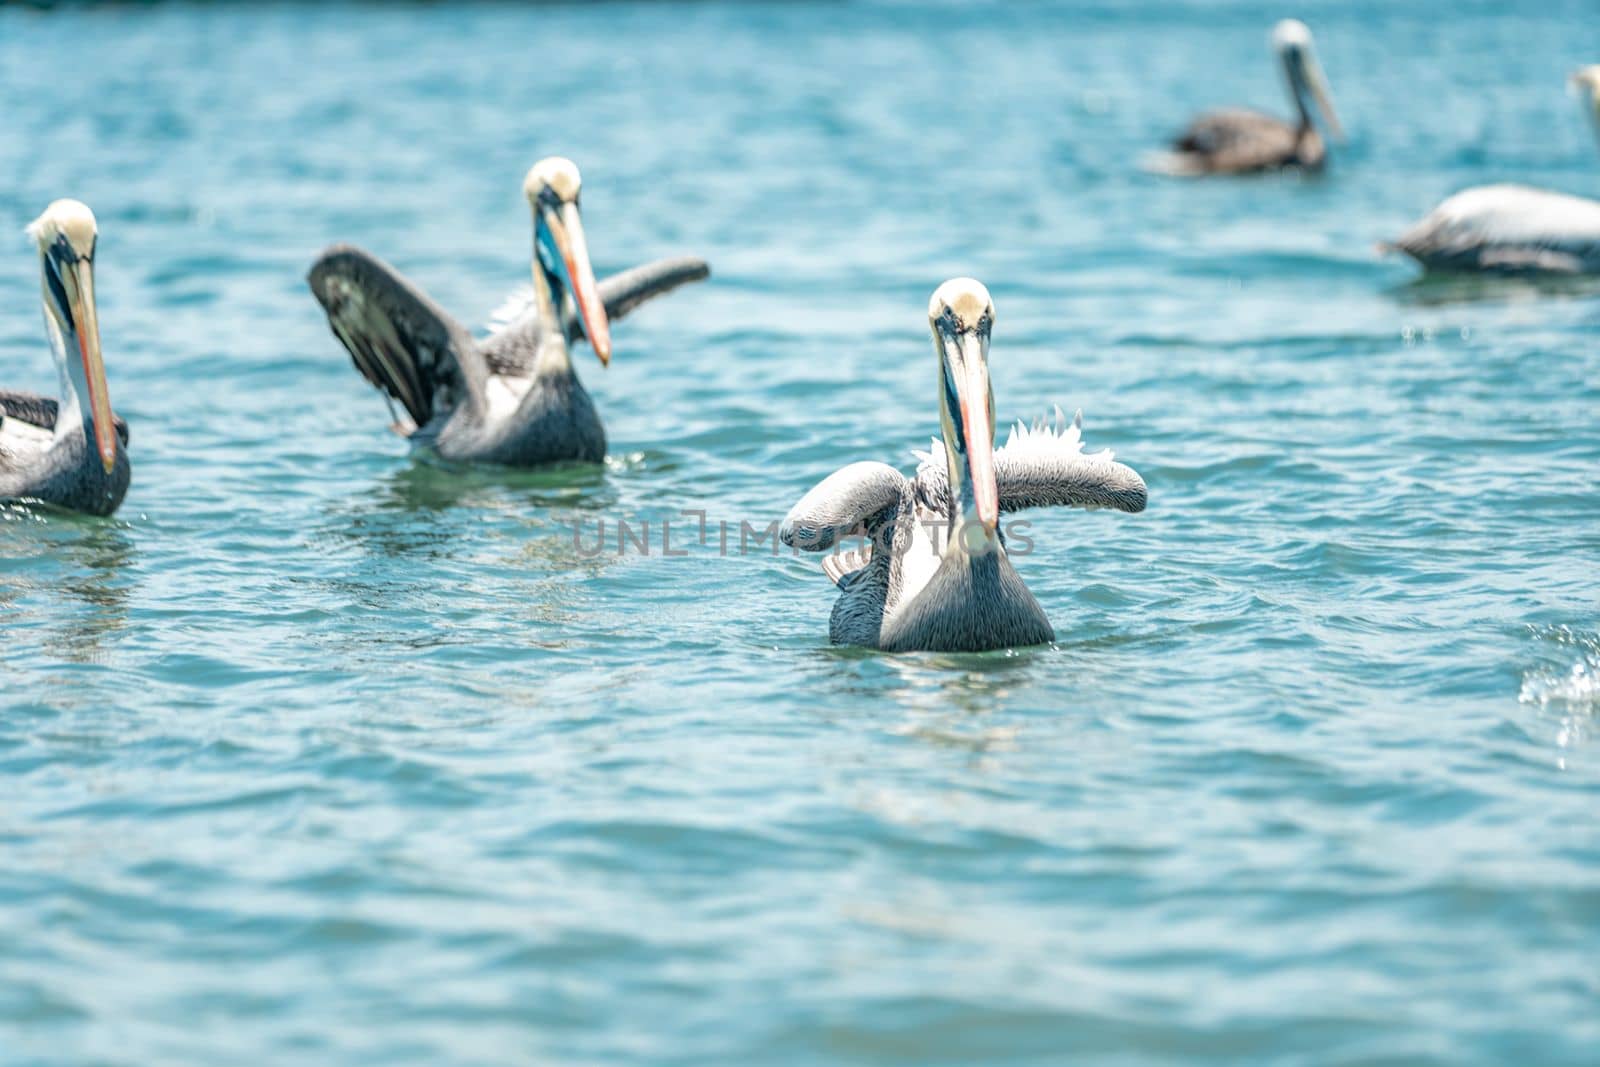 pelicans on the water surface of the ocean by Edophoto